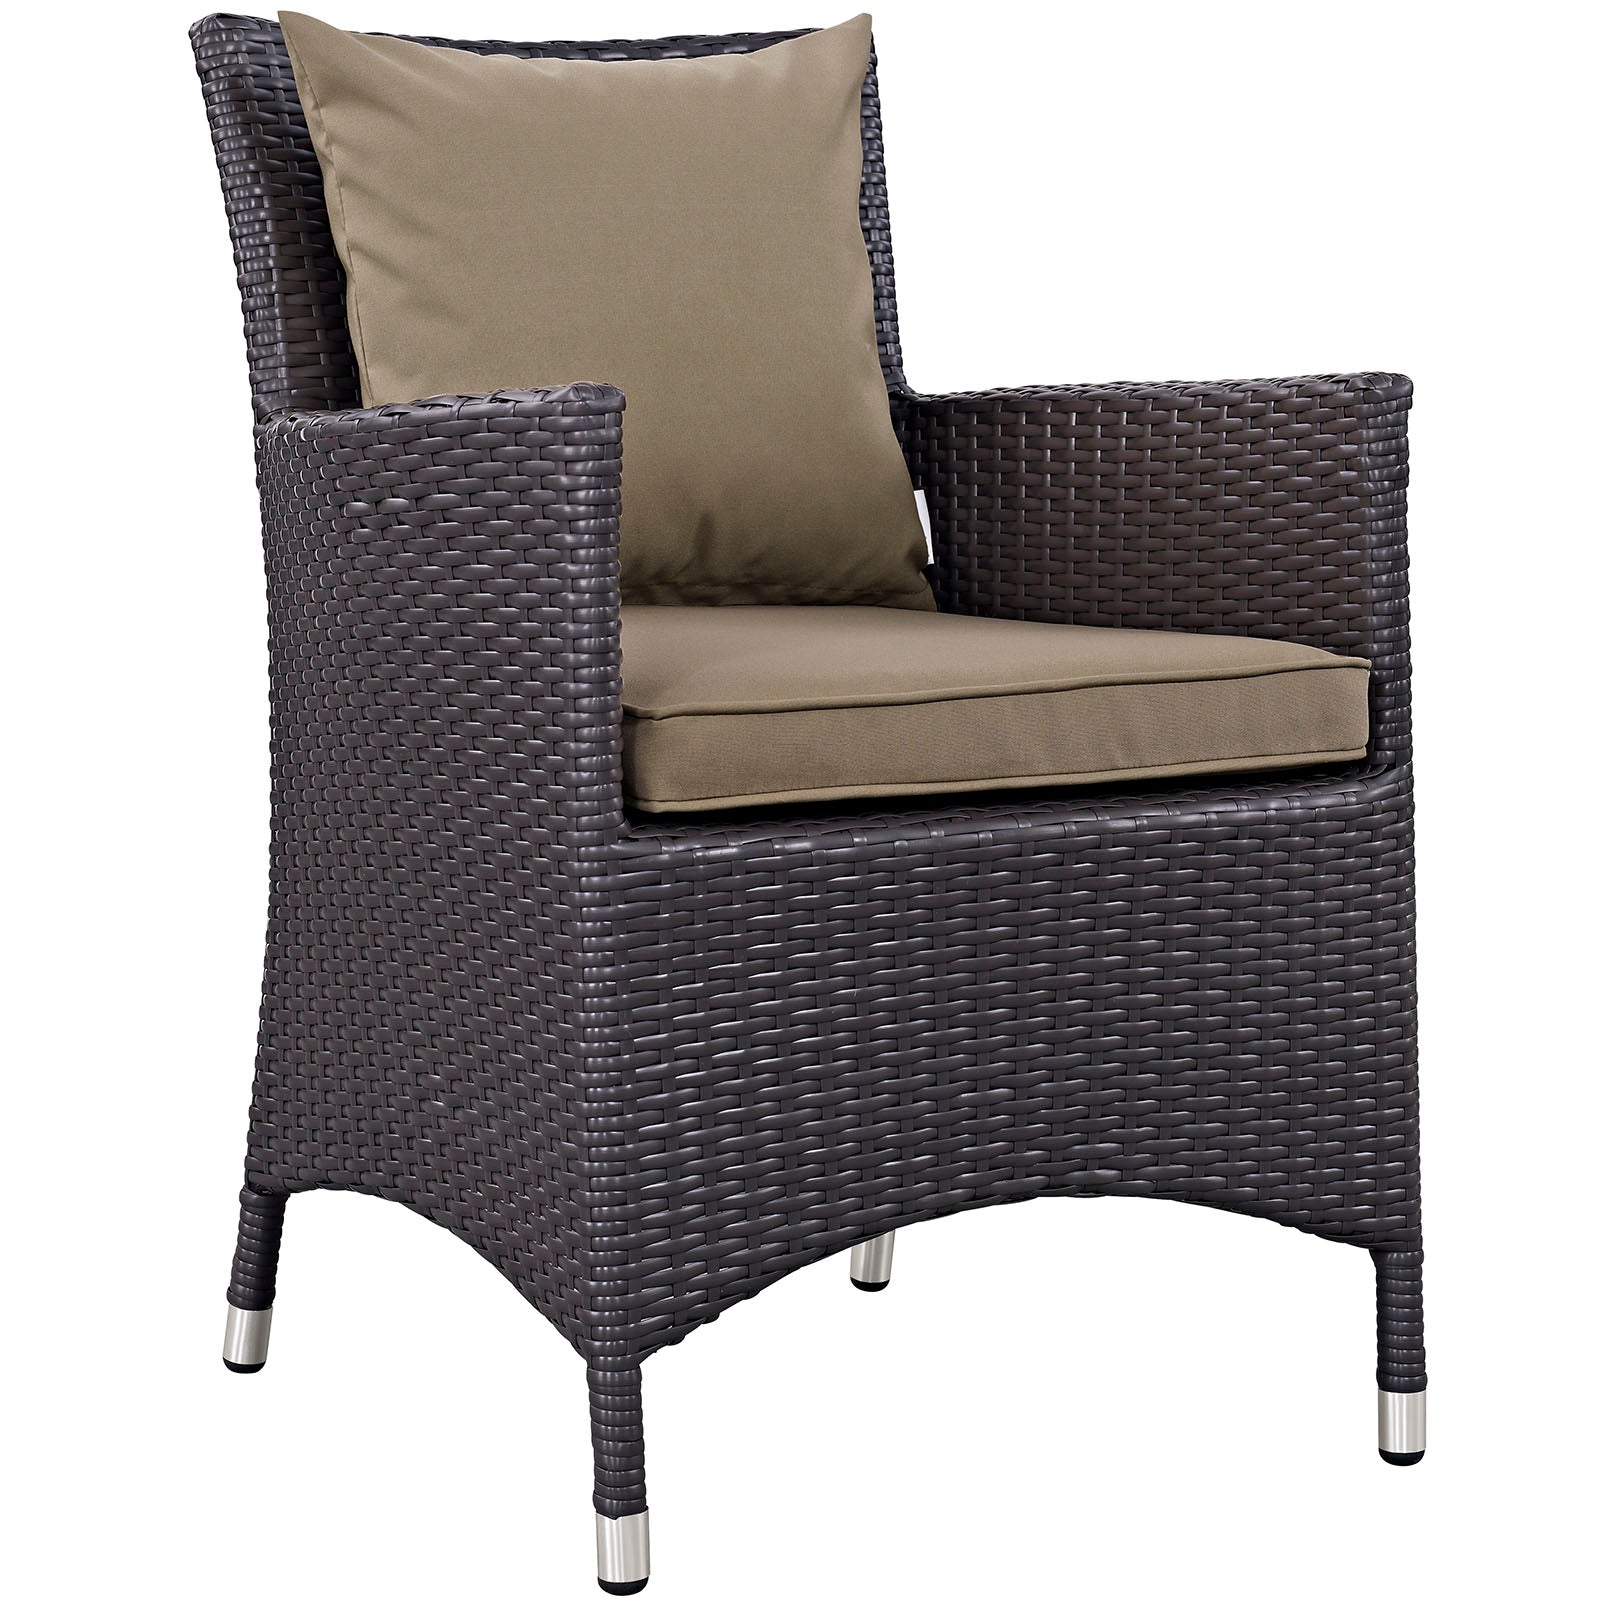 Modway Outdoor Dining Chairs - Convene Dining Outdoor Patio Armchair Espresso Mocha